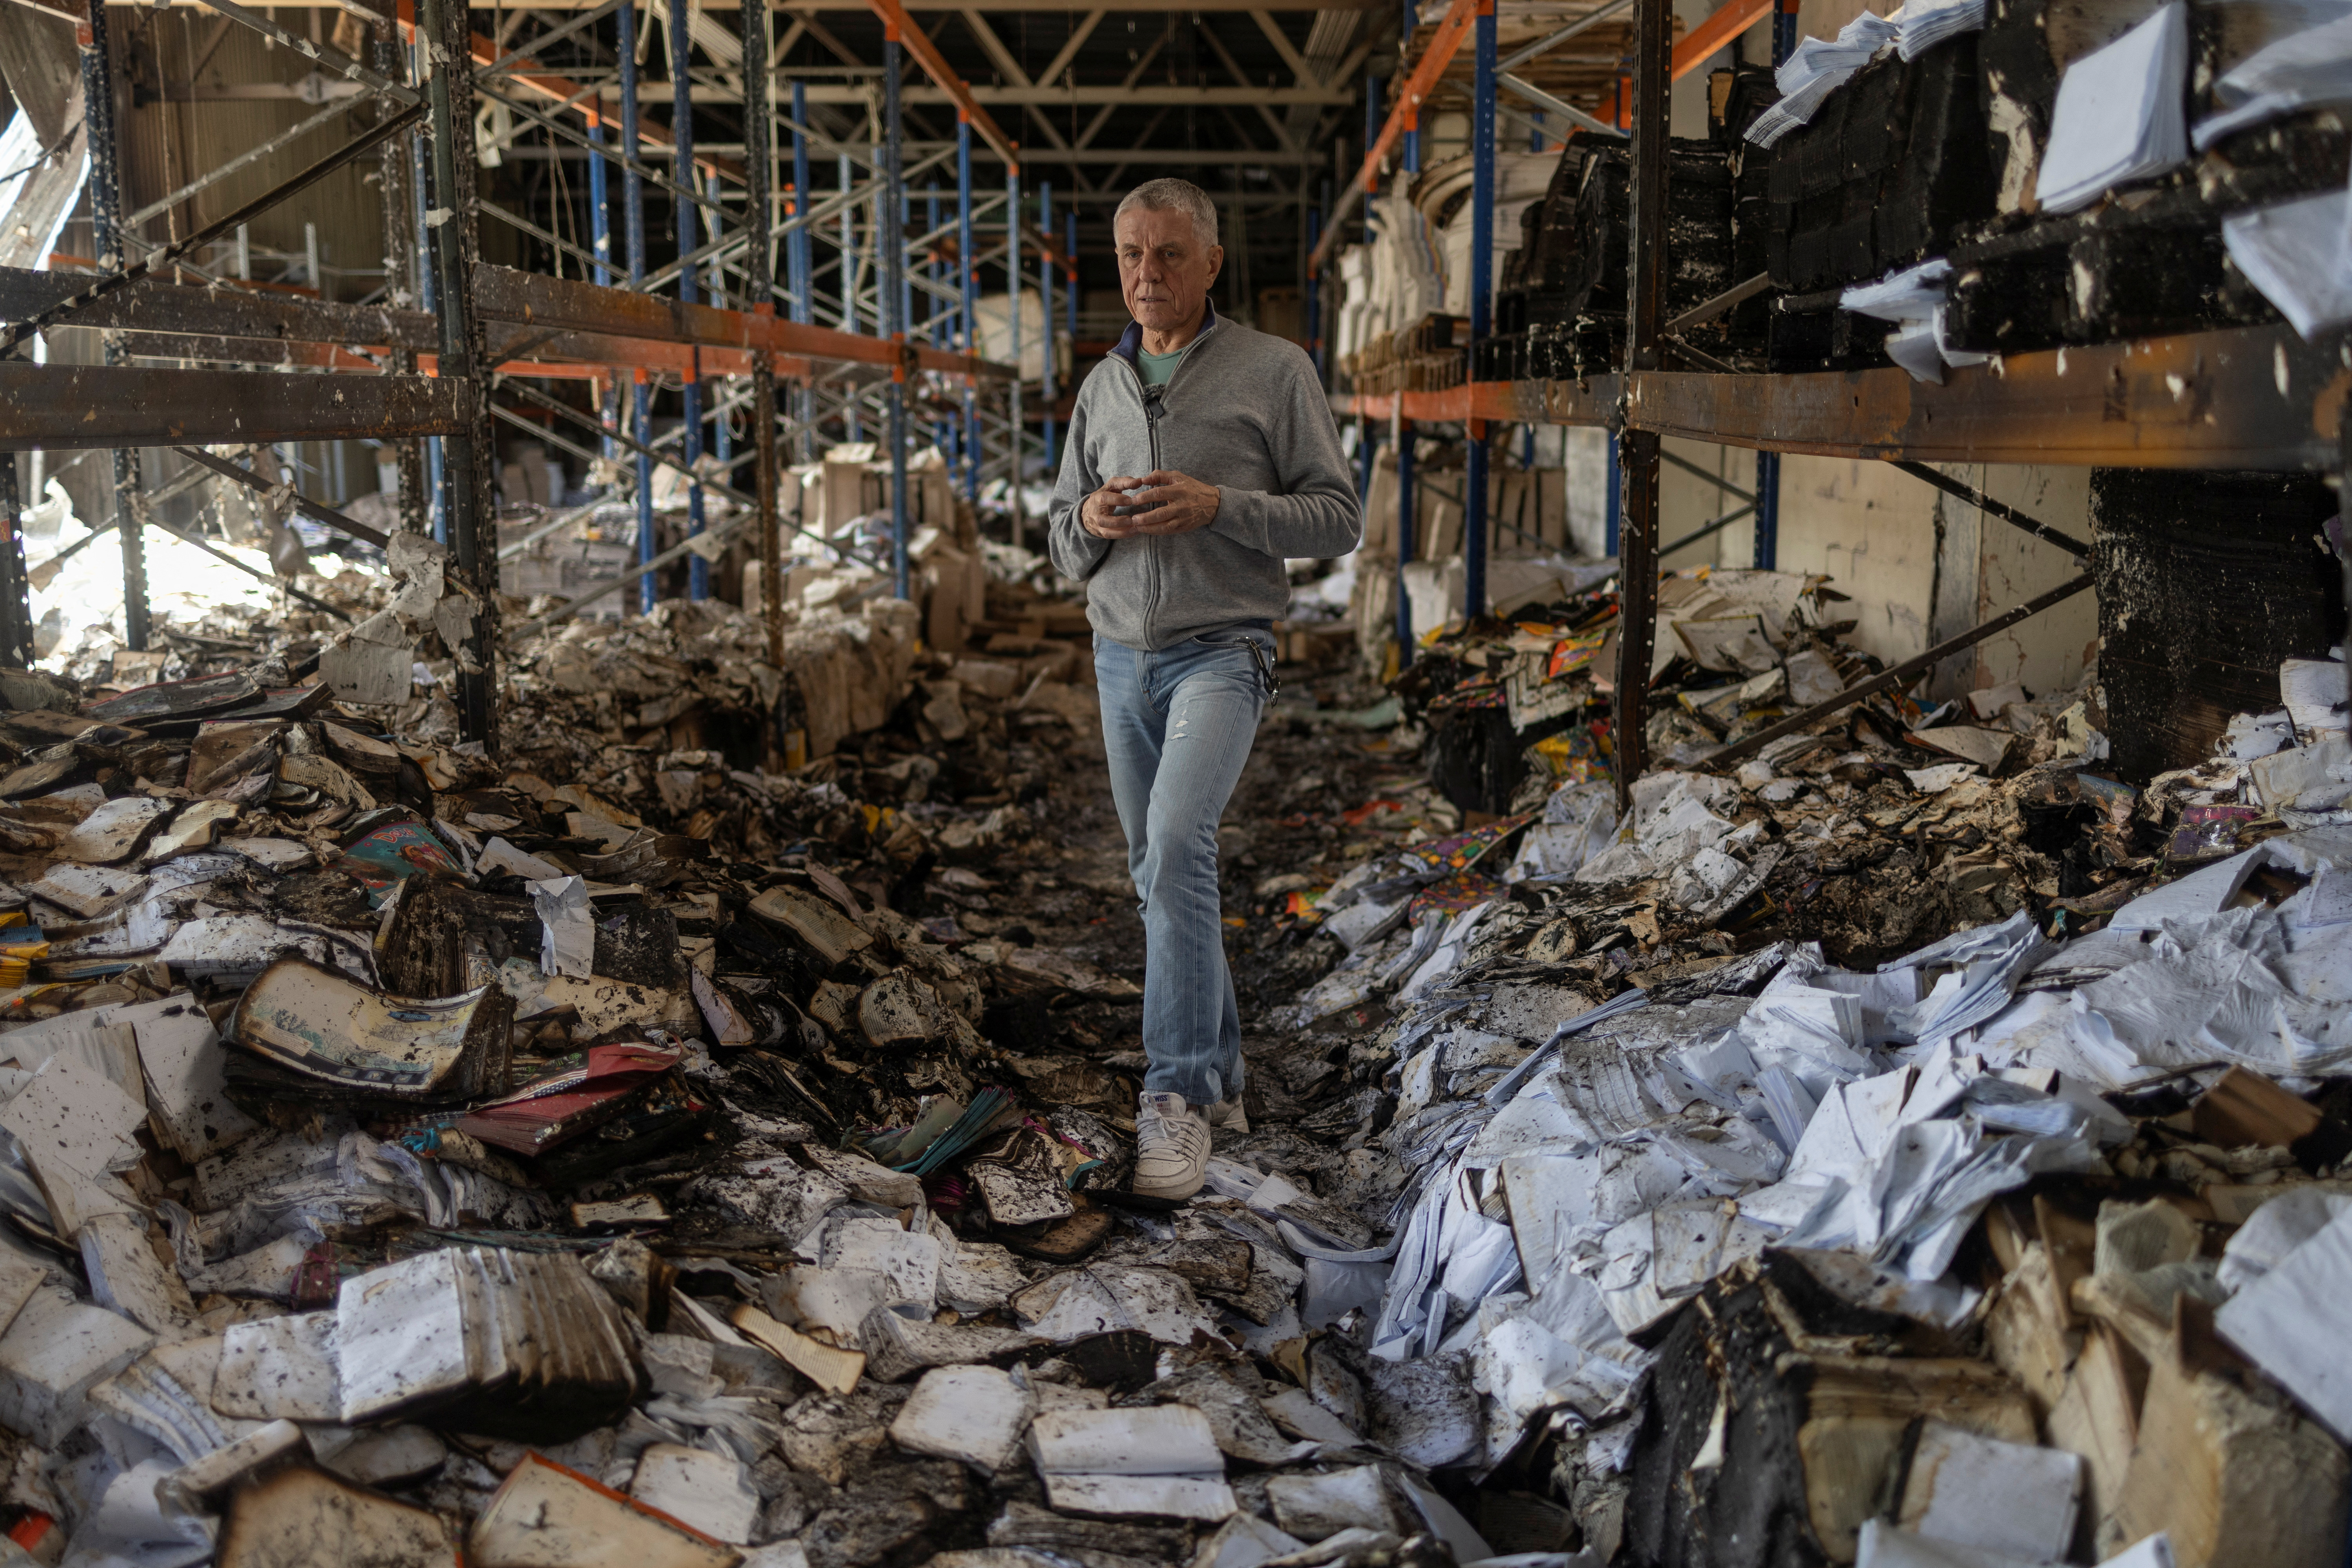 Sergii Polituchyi, Ukrainian publisher and businessman, stands between shelves with burned books in his printing house, which was badly damaged by a recent Russian missile strike, in Kharkiv